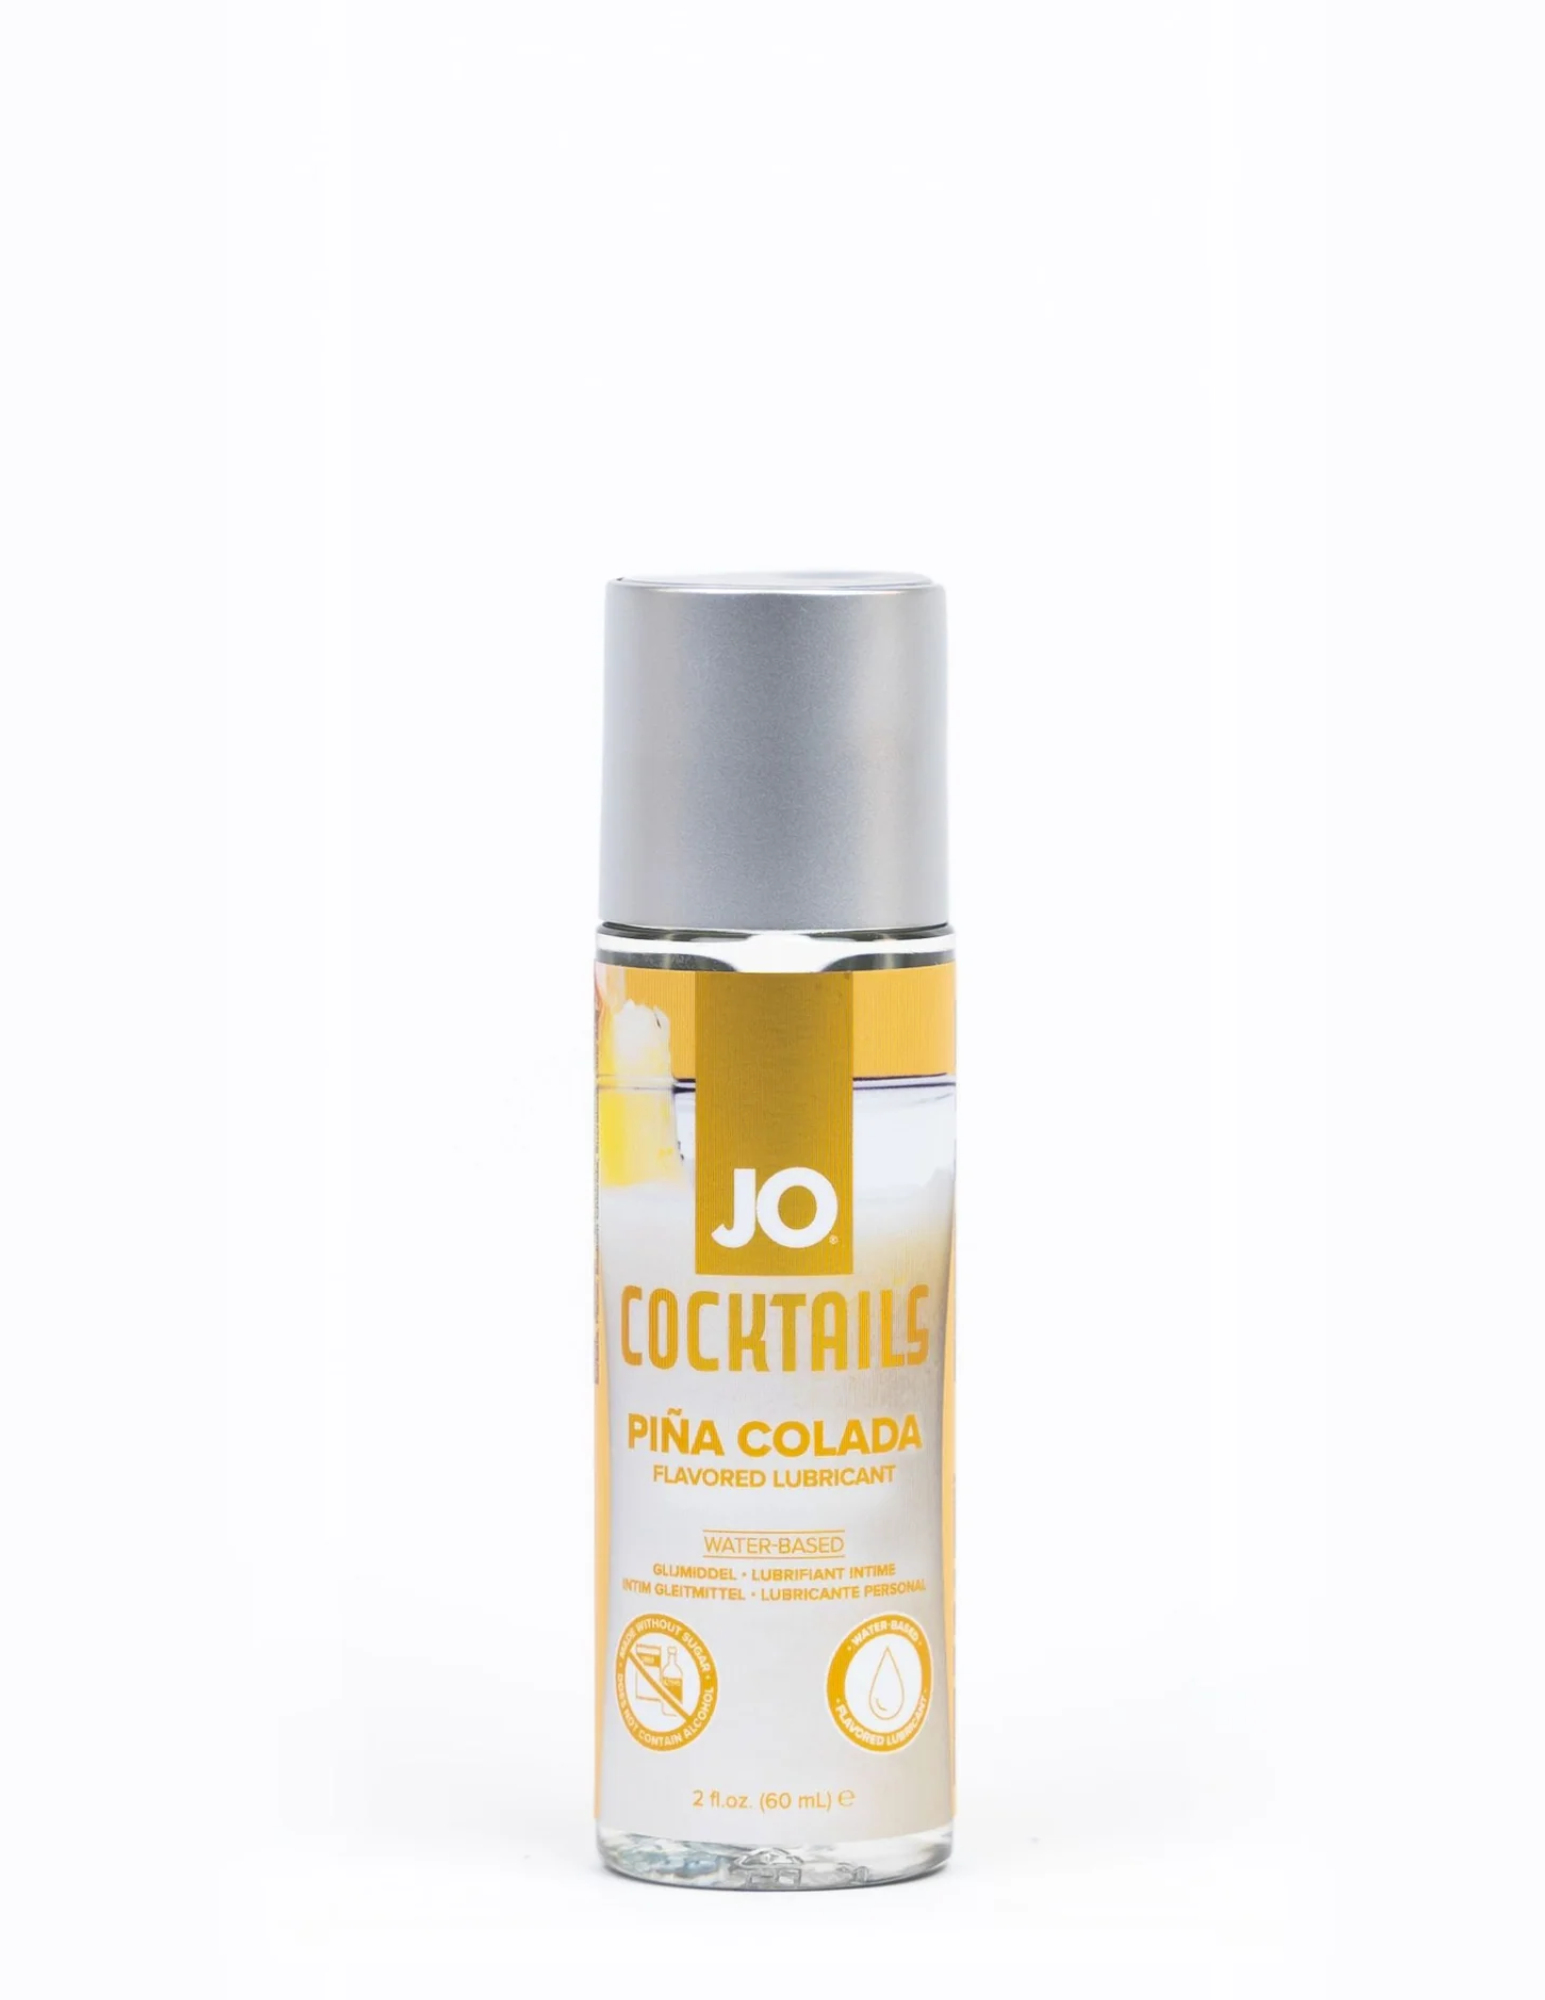 Photo of the 2oz Pina Colada bottle of System JO Cocktails Flavored Lubricant. 